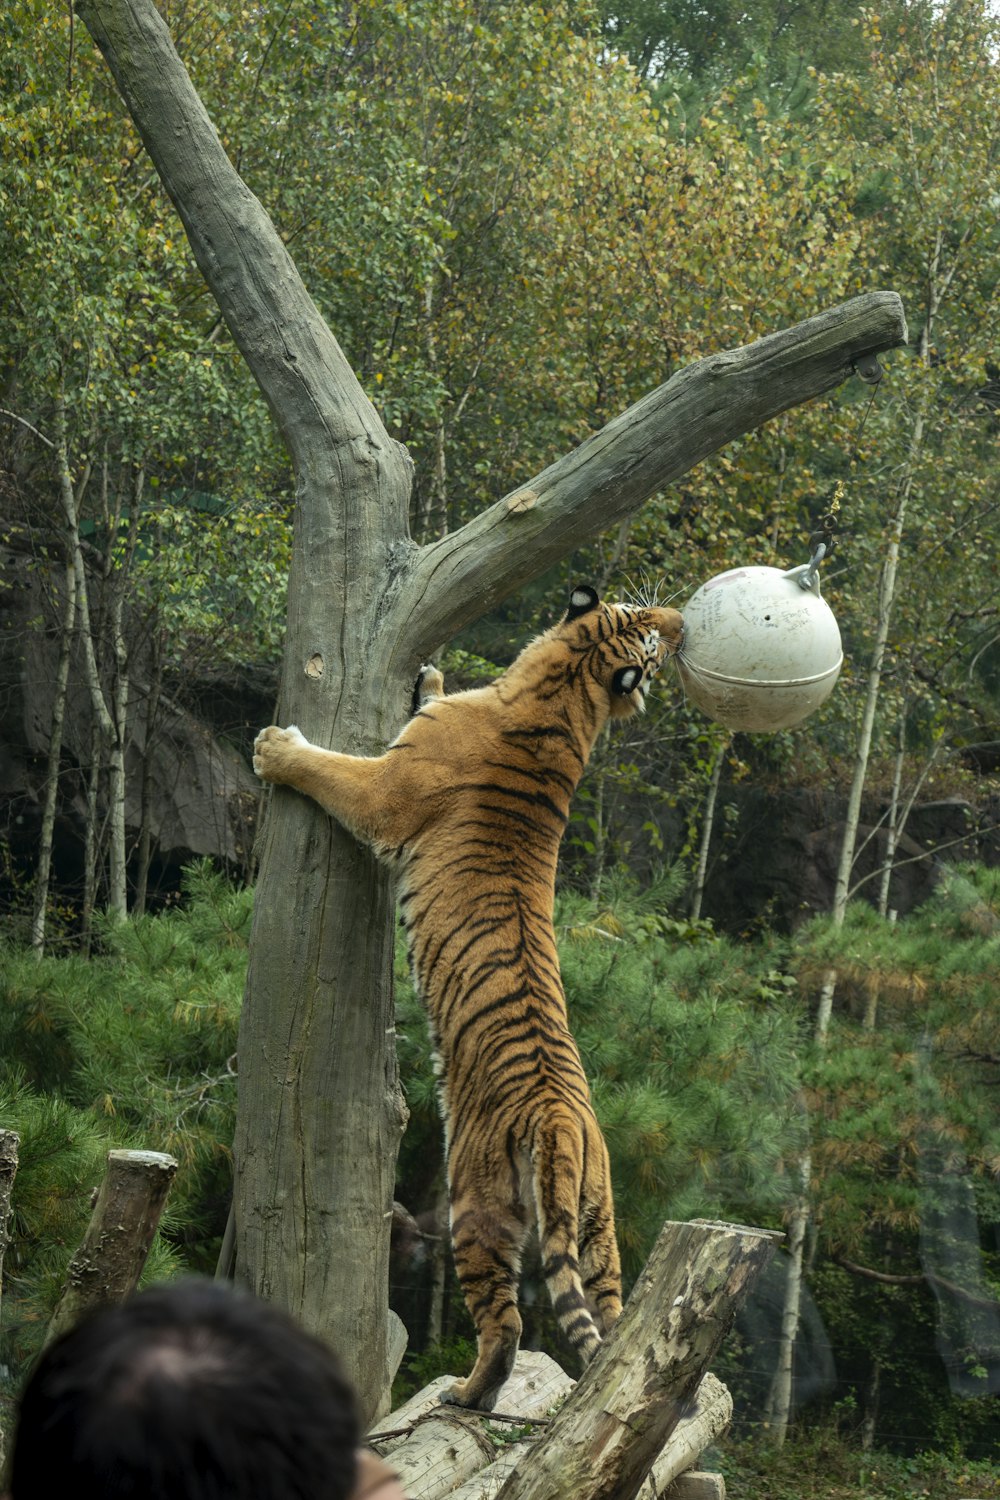 a tiger playing with a white ball in its mouth